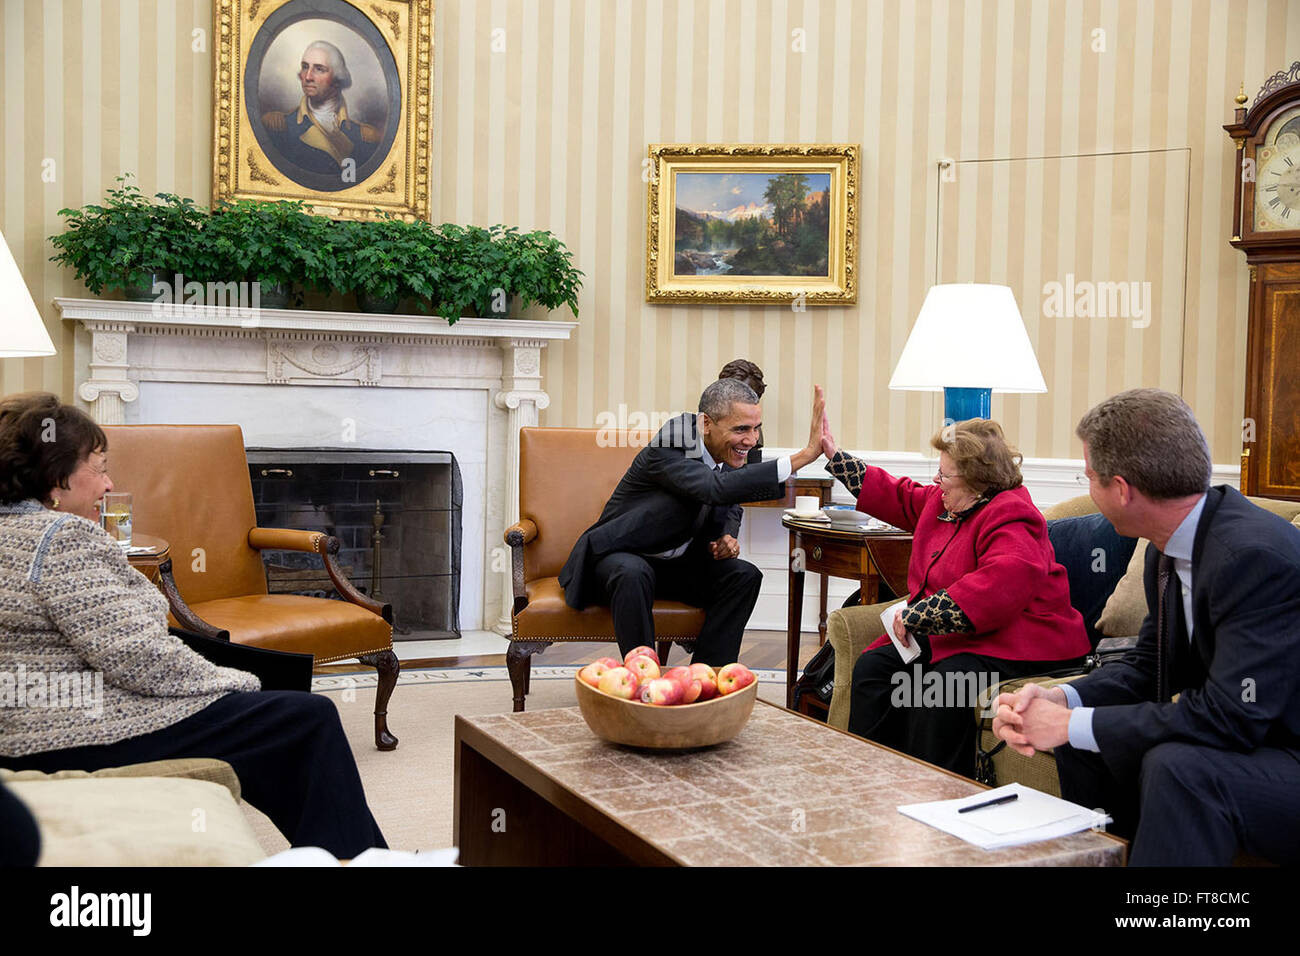 Nov. 3, 2015 'The President high-fives Sen. Barbara Mikulski, D-Md., during a meeting with her and Rep. Nita Lowey, D-N.Y., left, in the Oval Office. At right is OMB Director Shaun Donovan.' (Official White House Photo by Pete Souza) Stock Photo